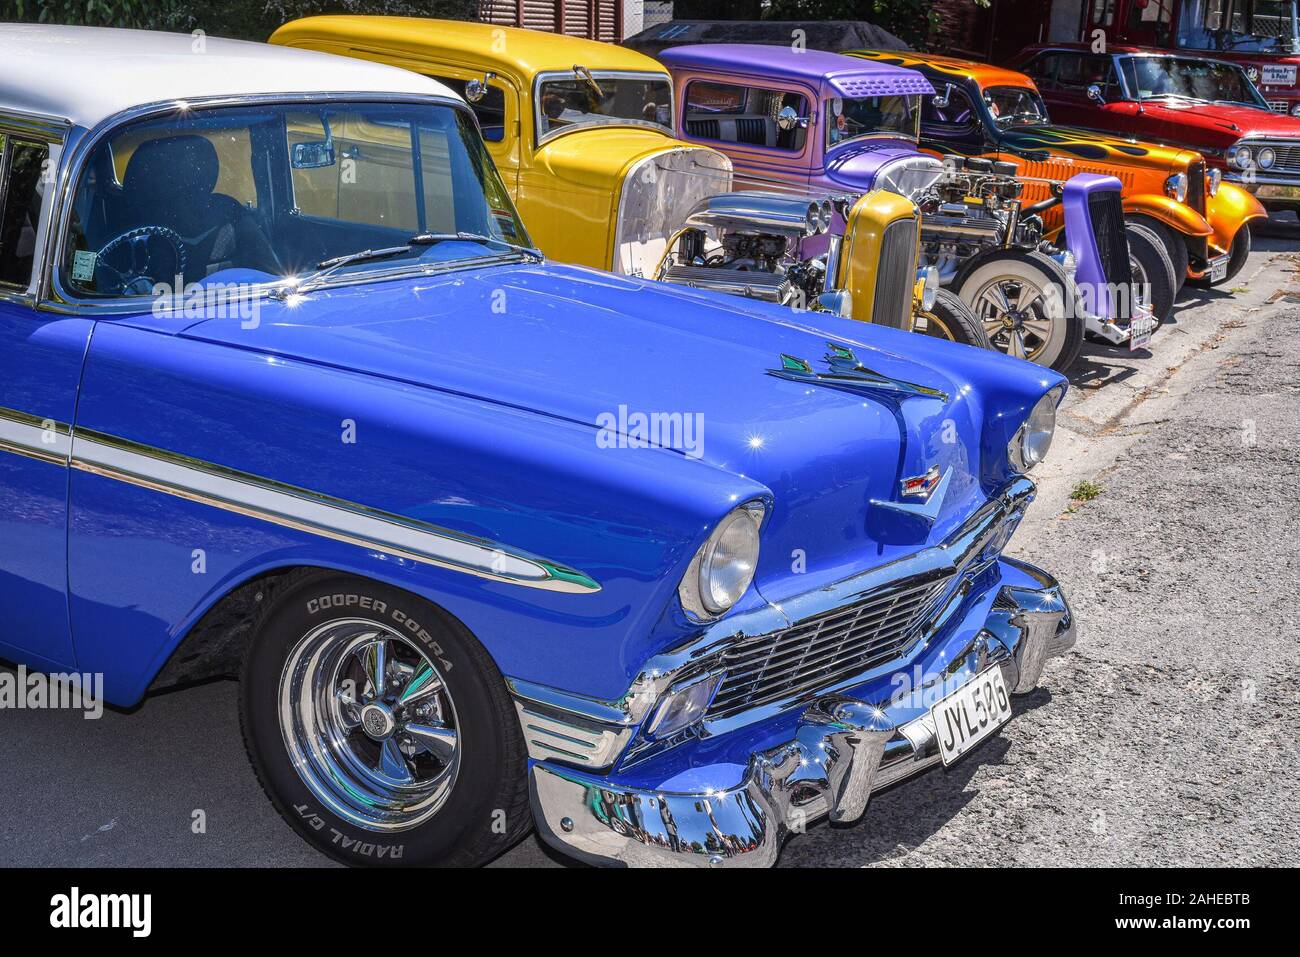 Methven, New Zealand. 28th Dec 2019. A sunny day brings out the custom cars for a gathering of hot rods on the southern island of New Zealand. Stock Photo